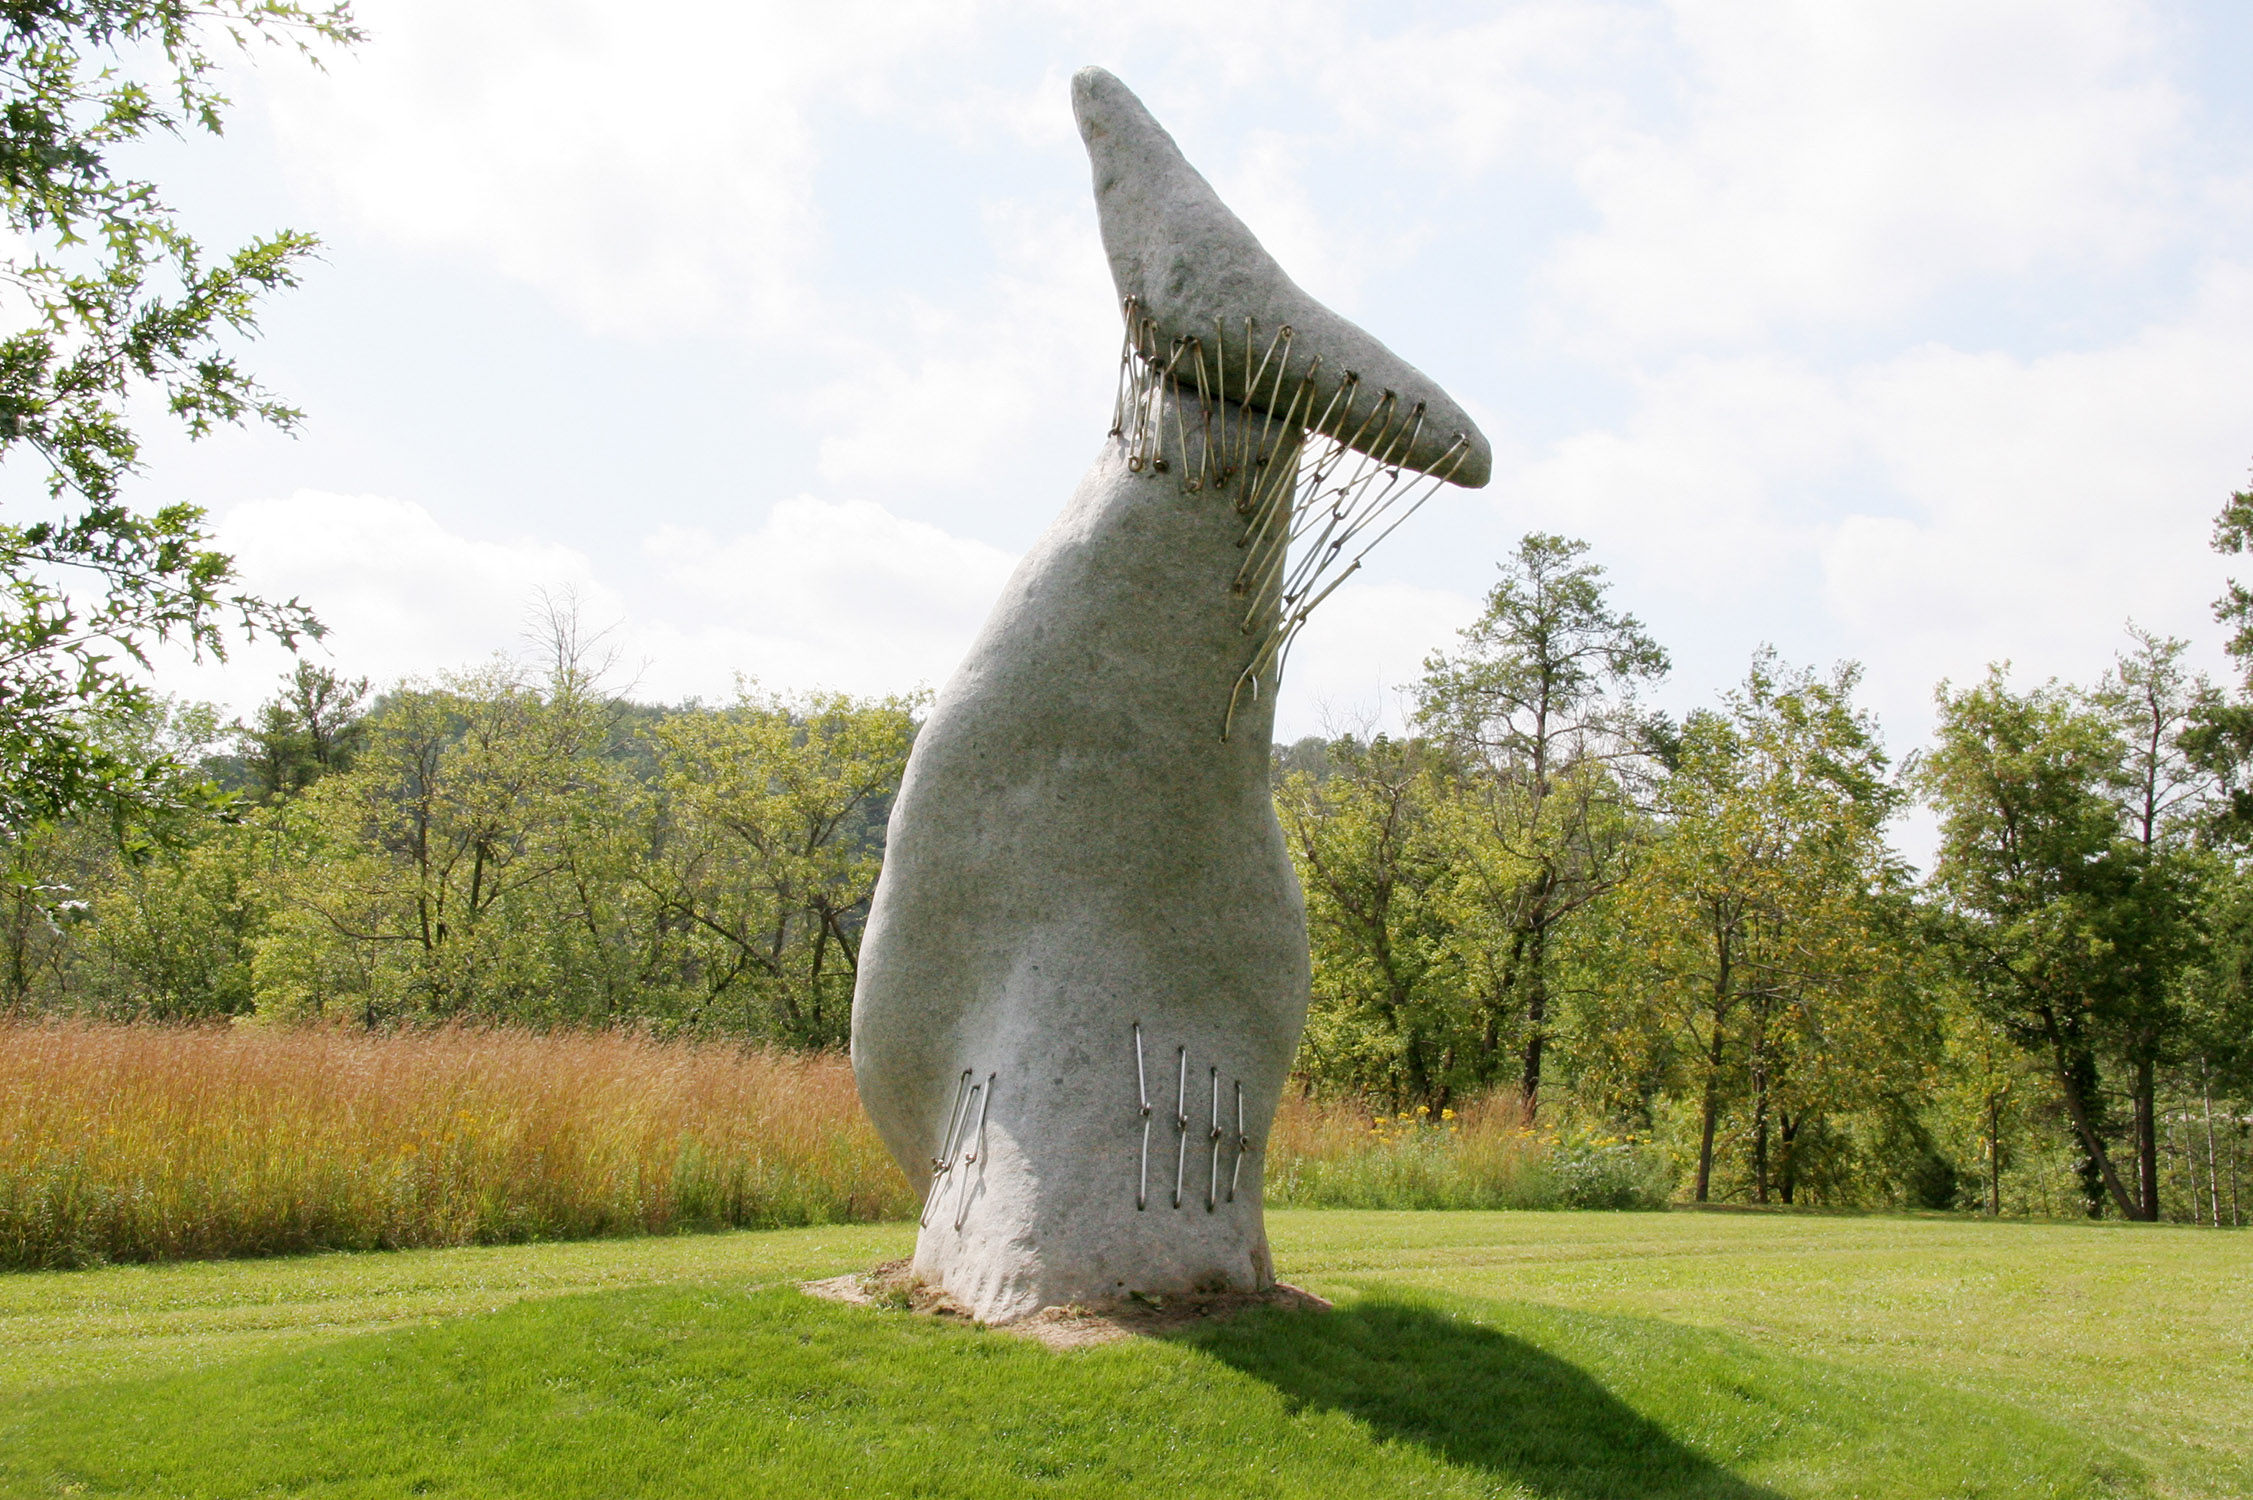 Moby Dick by Zoran Mojsilov at Anderson Center Sculpture Garden in Red Wing, Minnesota